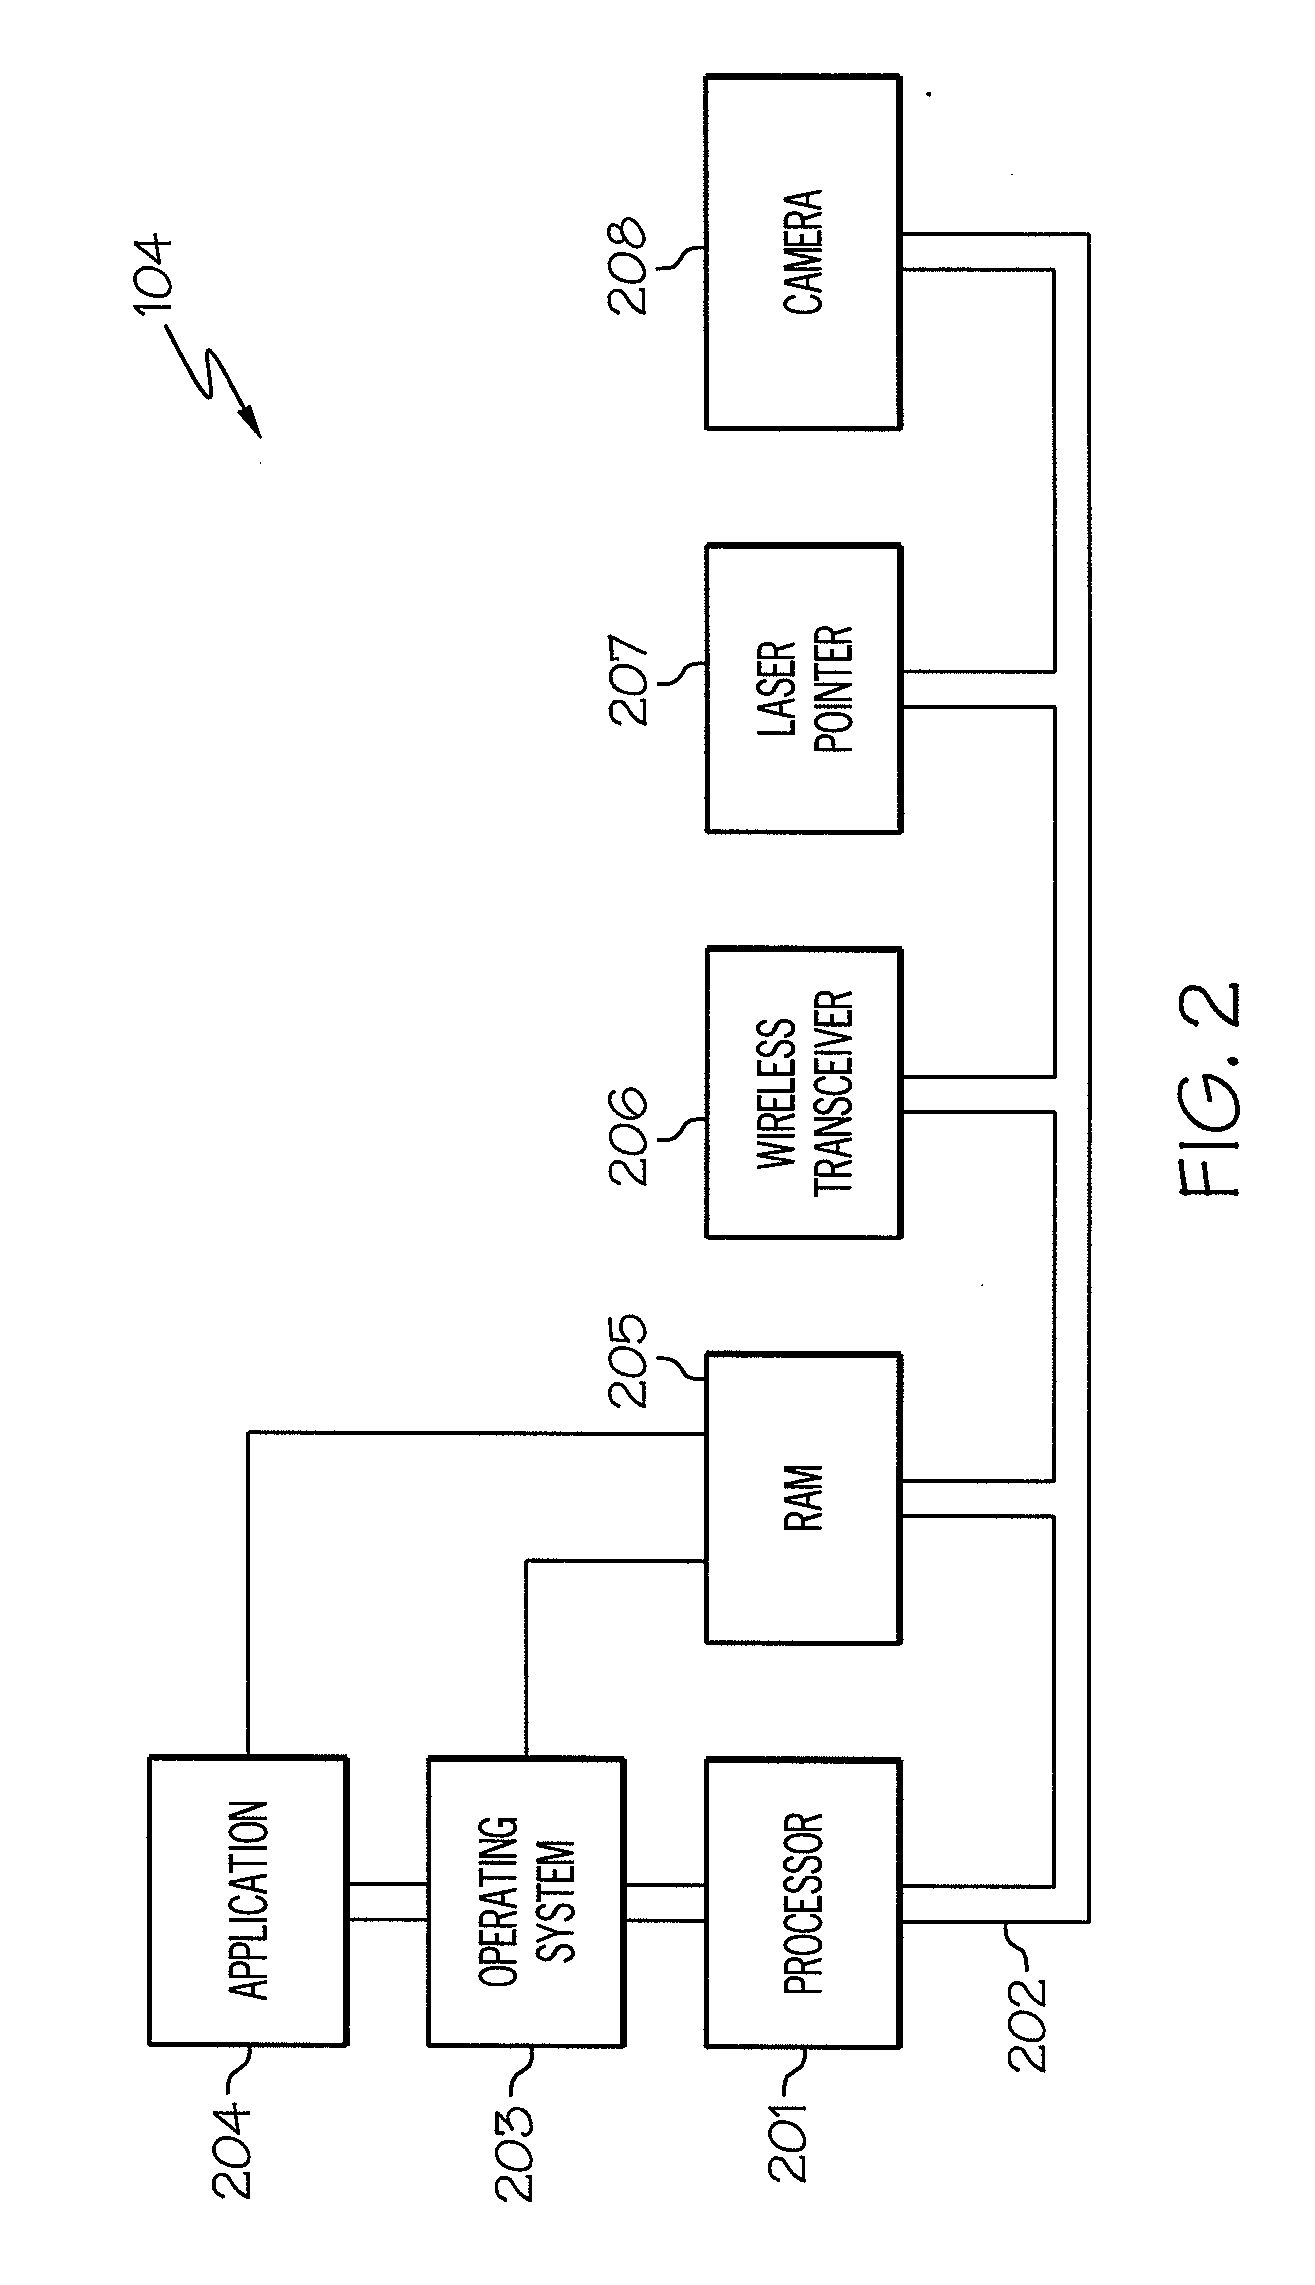 Remotely controlling computer output displayed on a screen using a single hand-held device